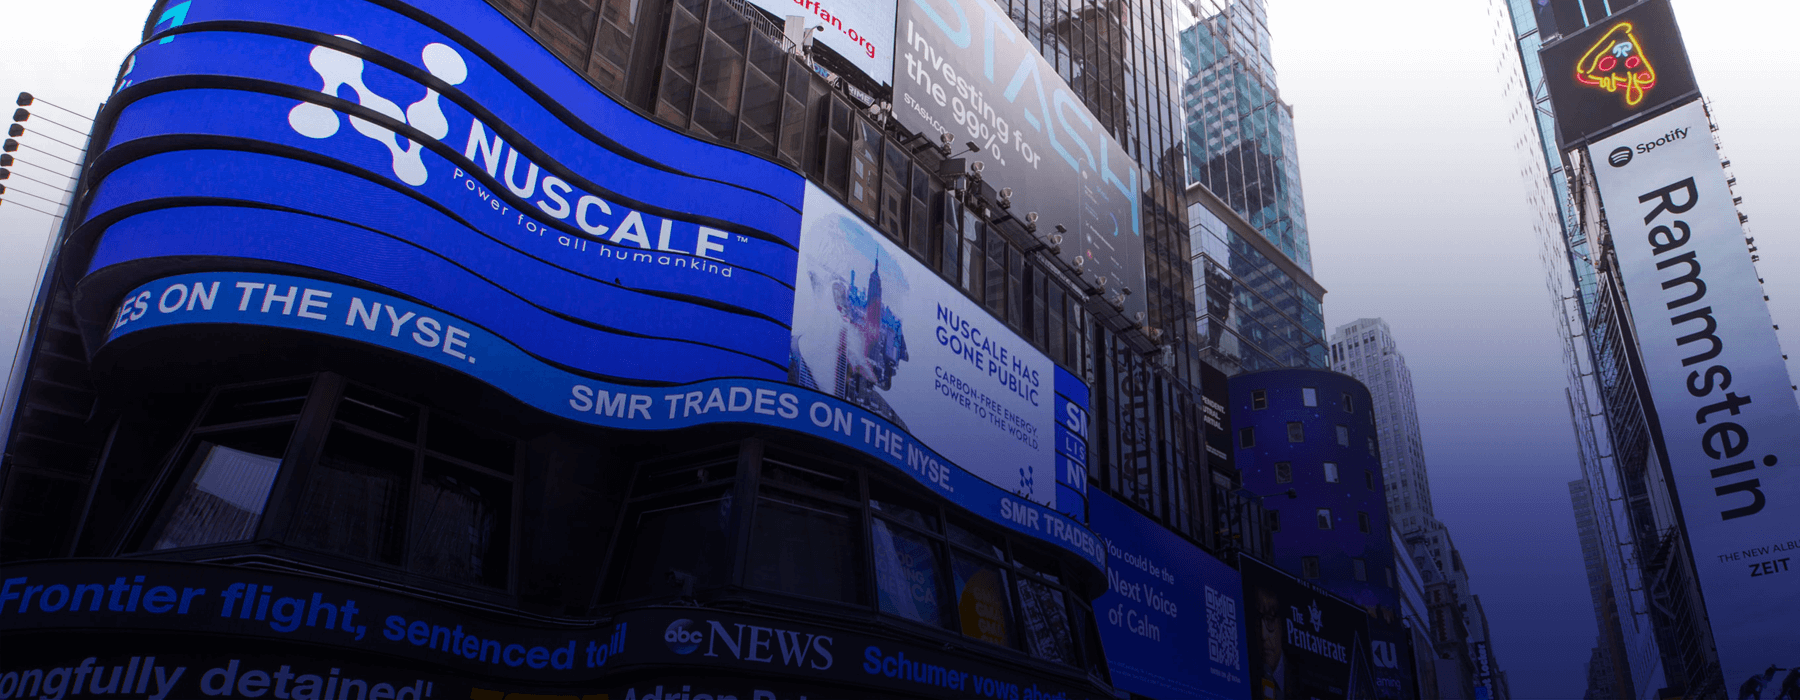 Exterior of NYSE with Nuscale on the billboard. 